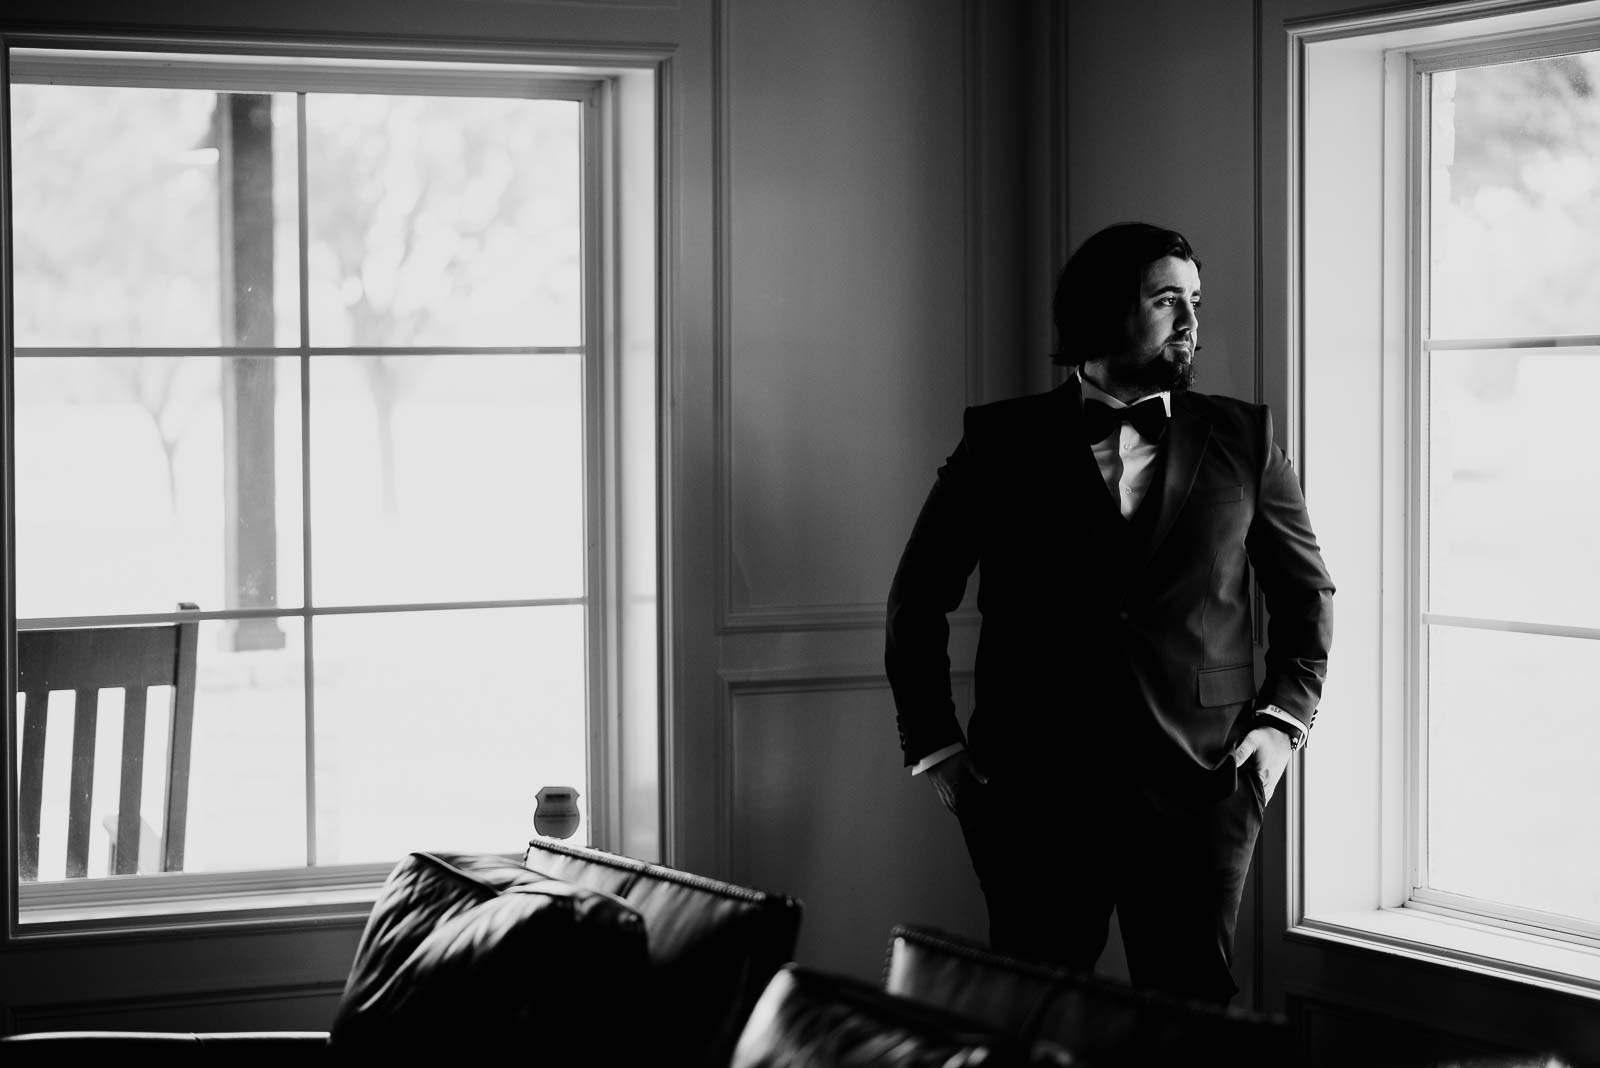 Groom waits in a house looking out of the window